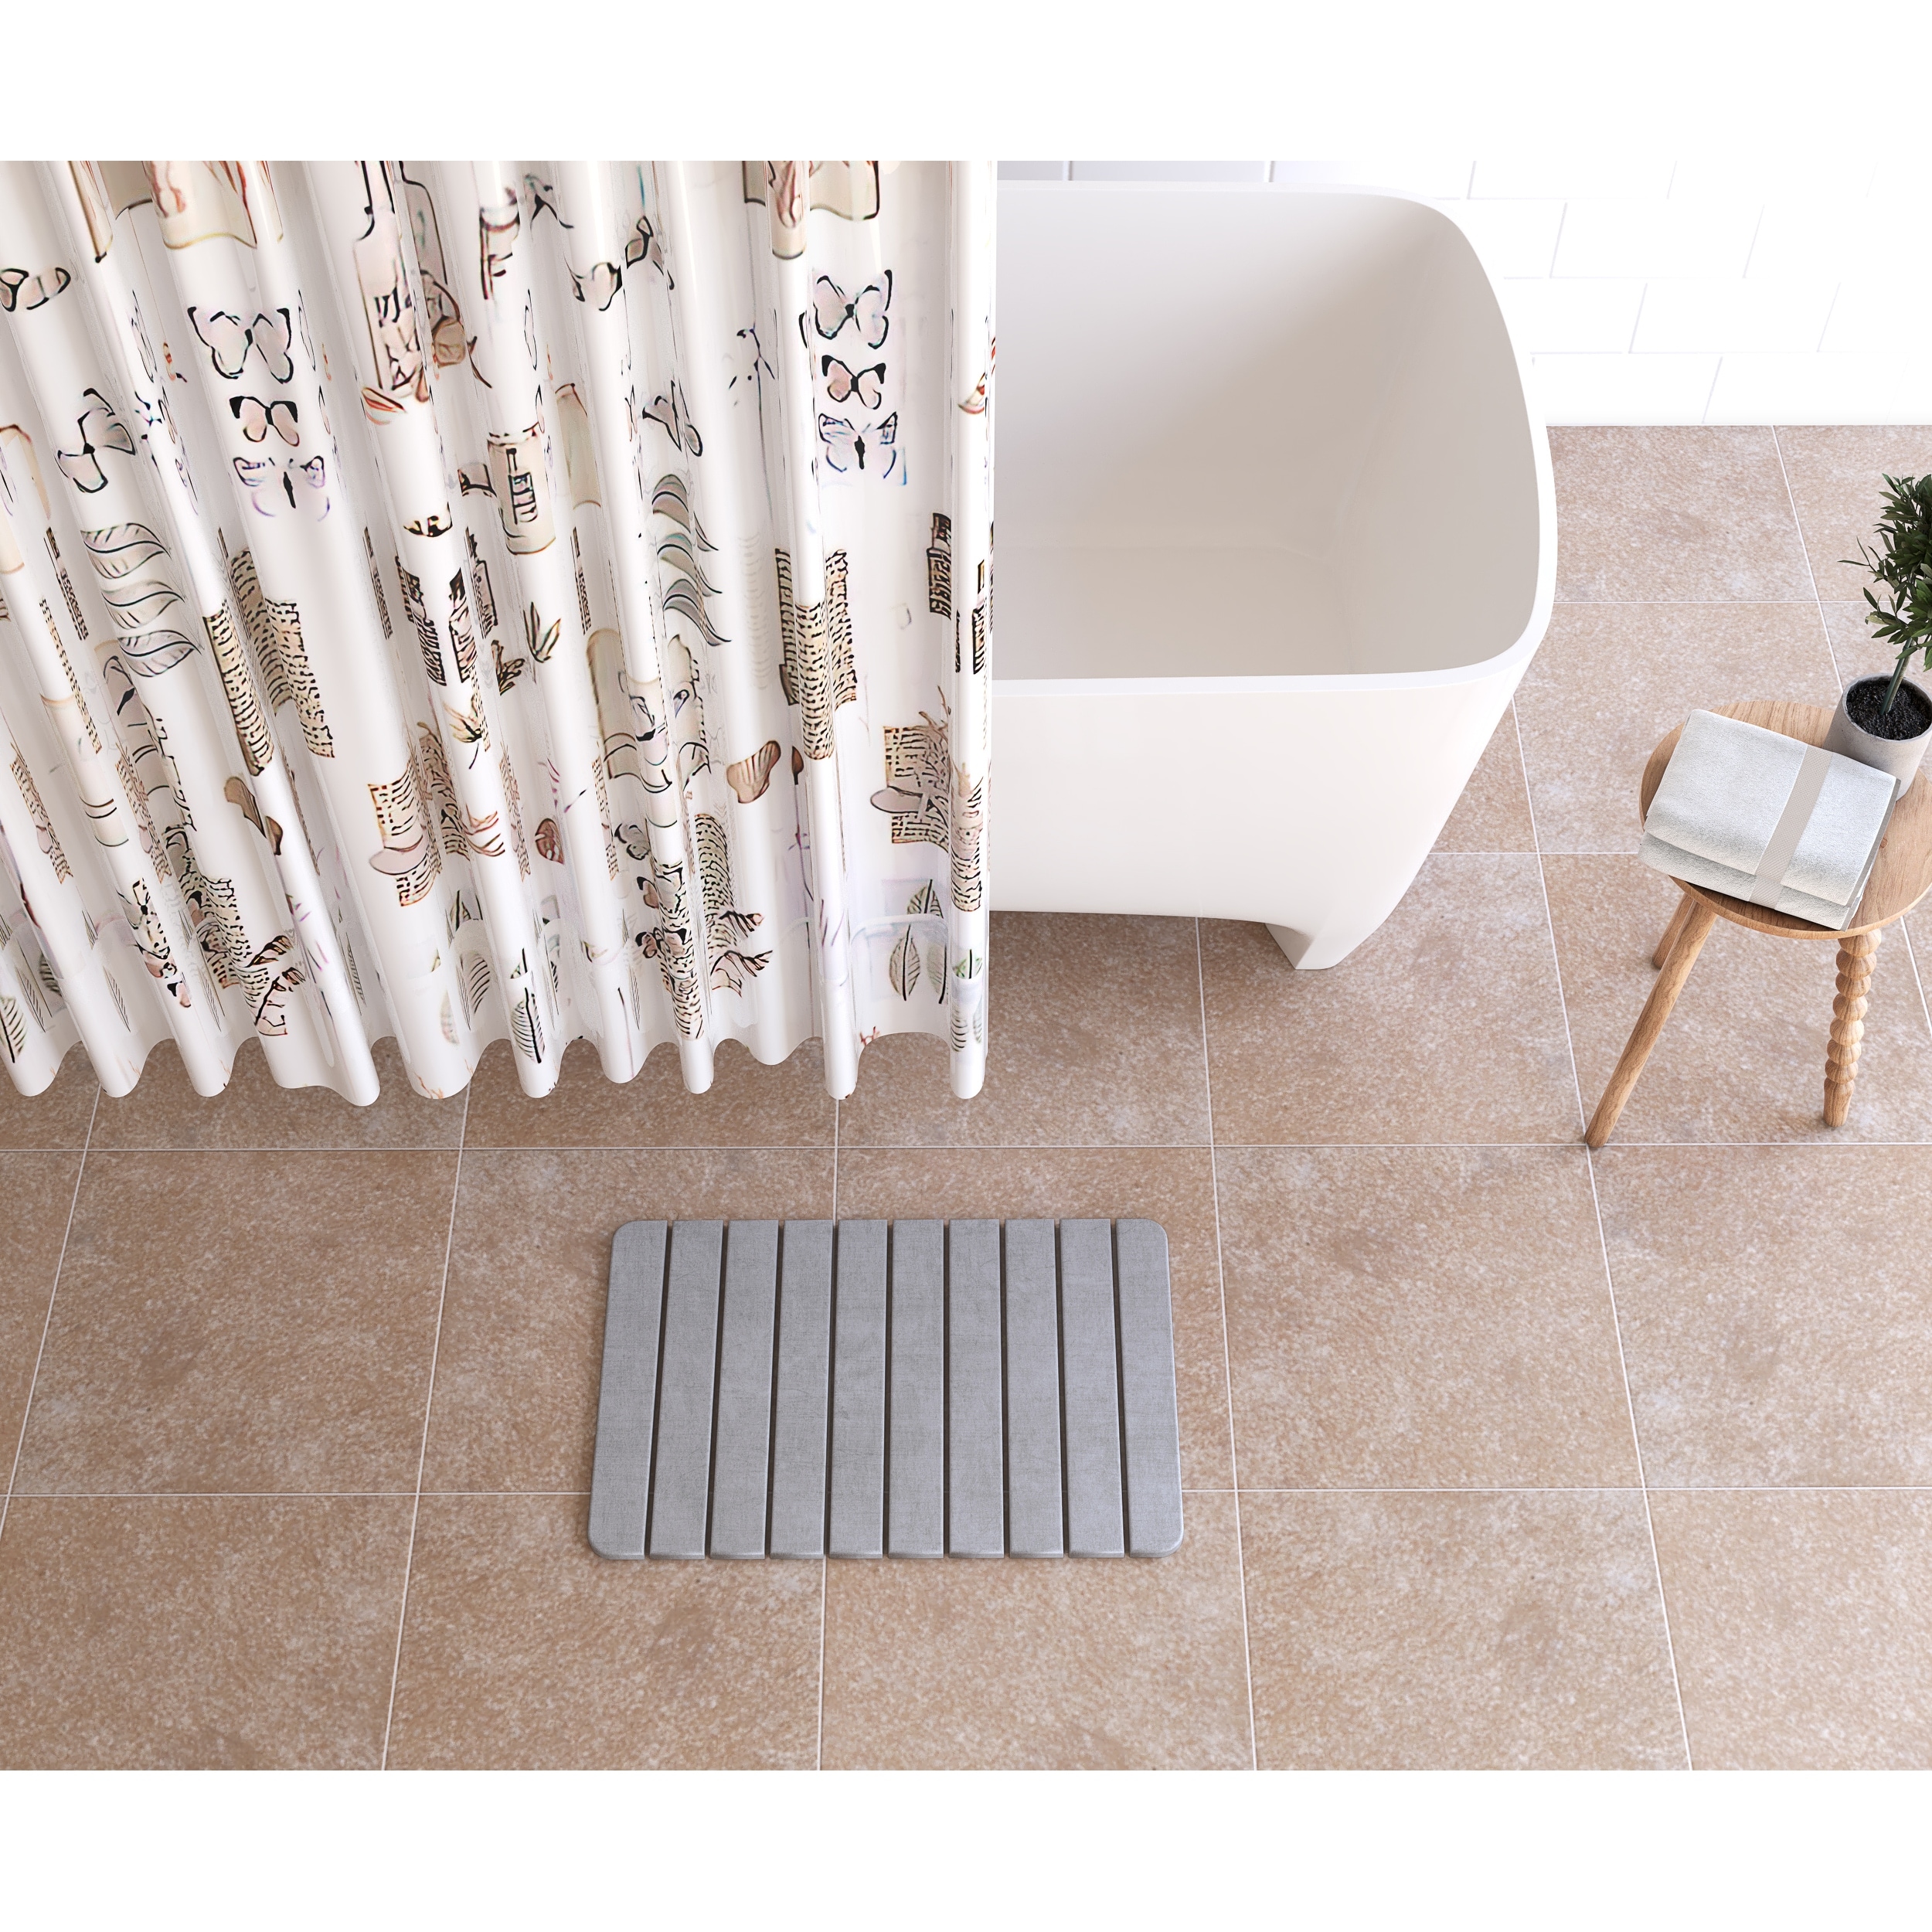 Quick Drying Diatomite Stone Bath Mat - On Sale - Bed Bath